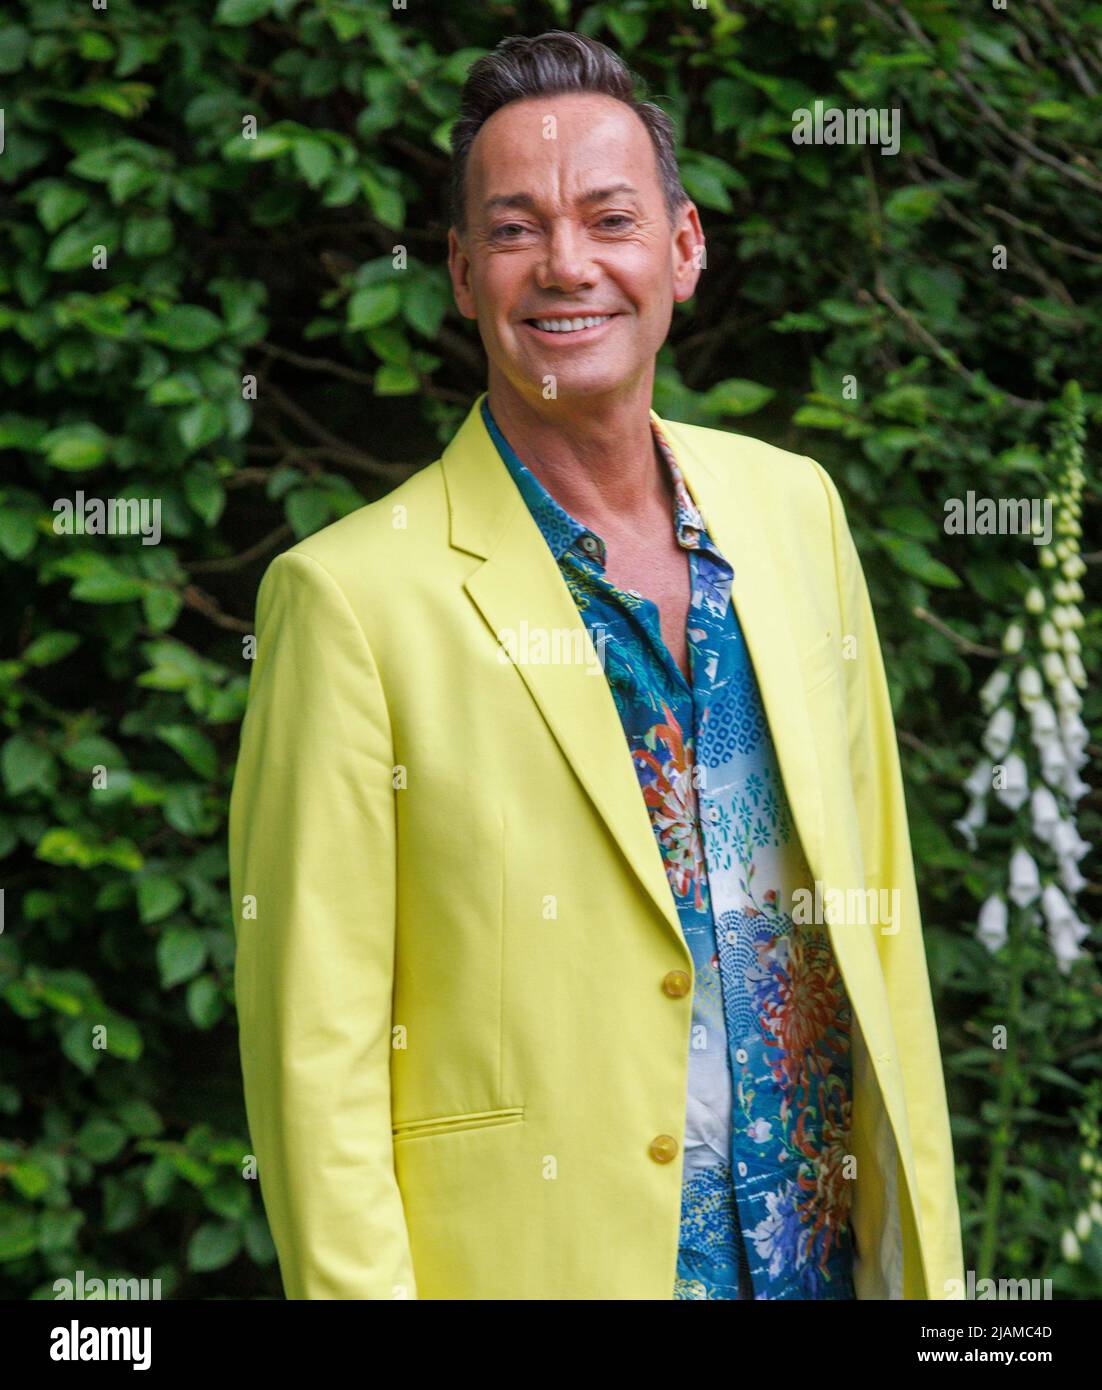 Craig Revel Horwood, author, dance choreographer, theatre director and drag queen, at the RHS Chelsea flower show. Stock Photo